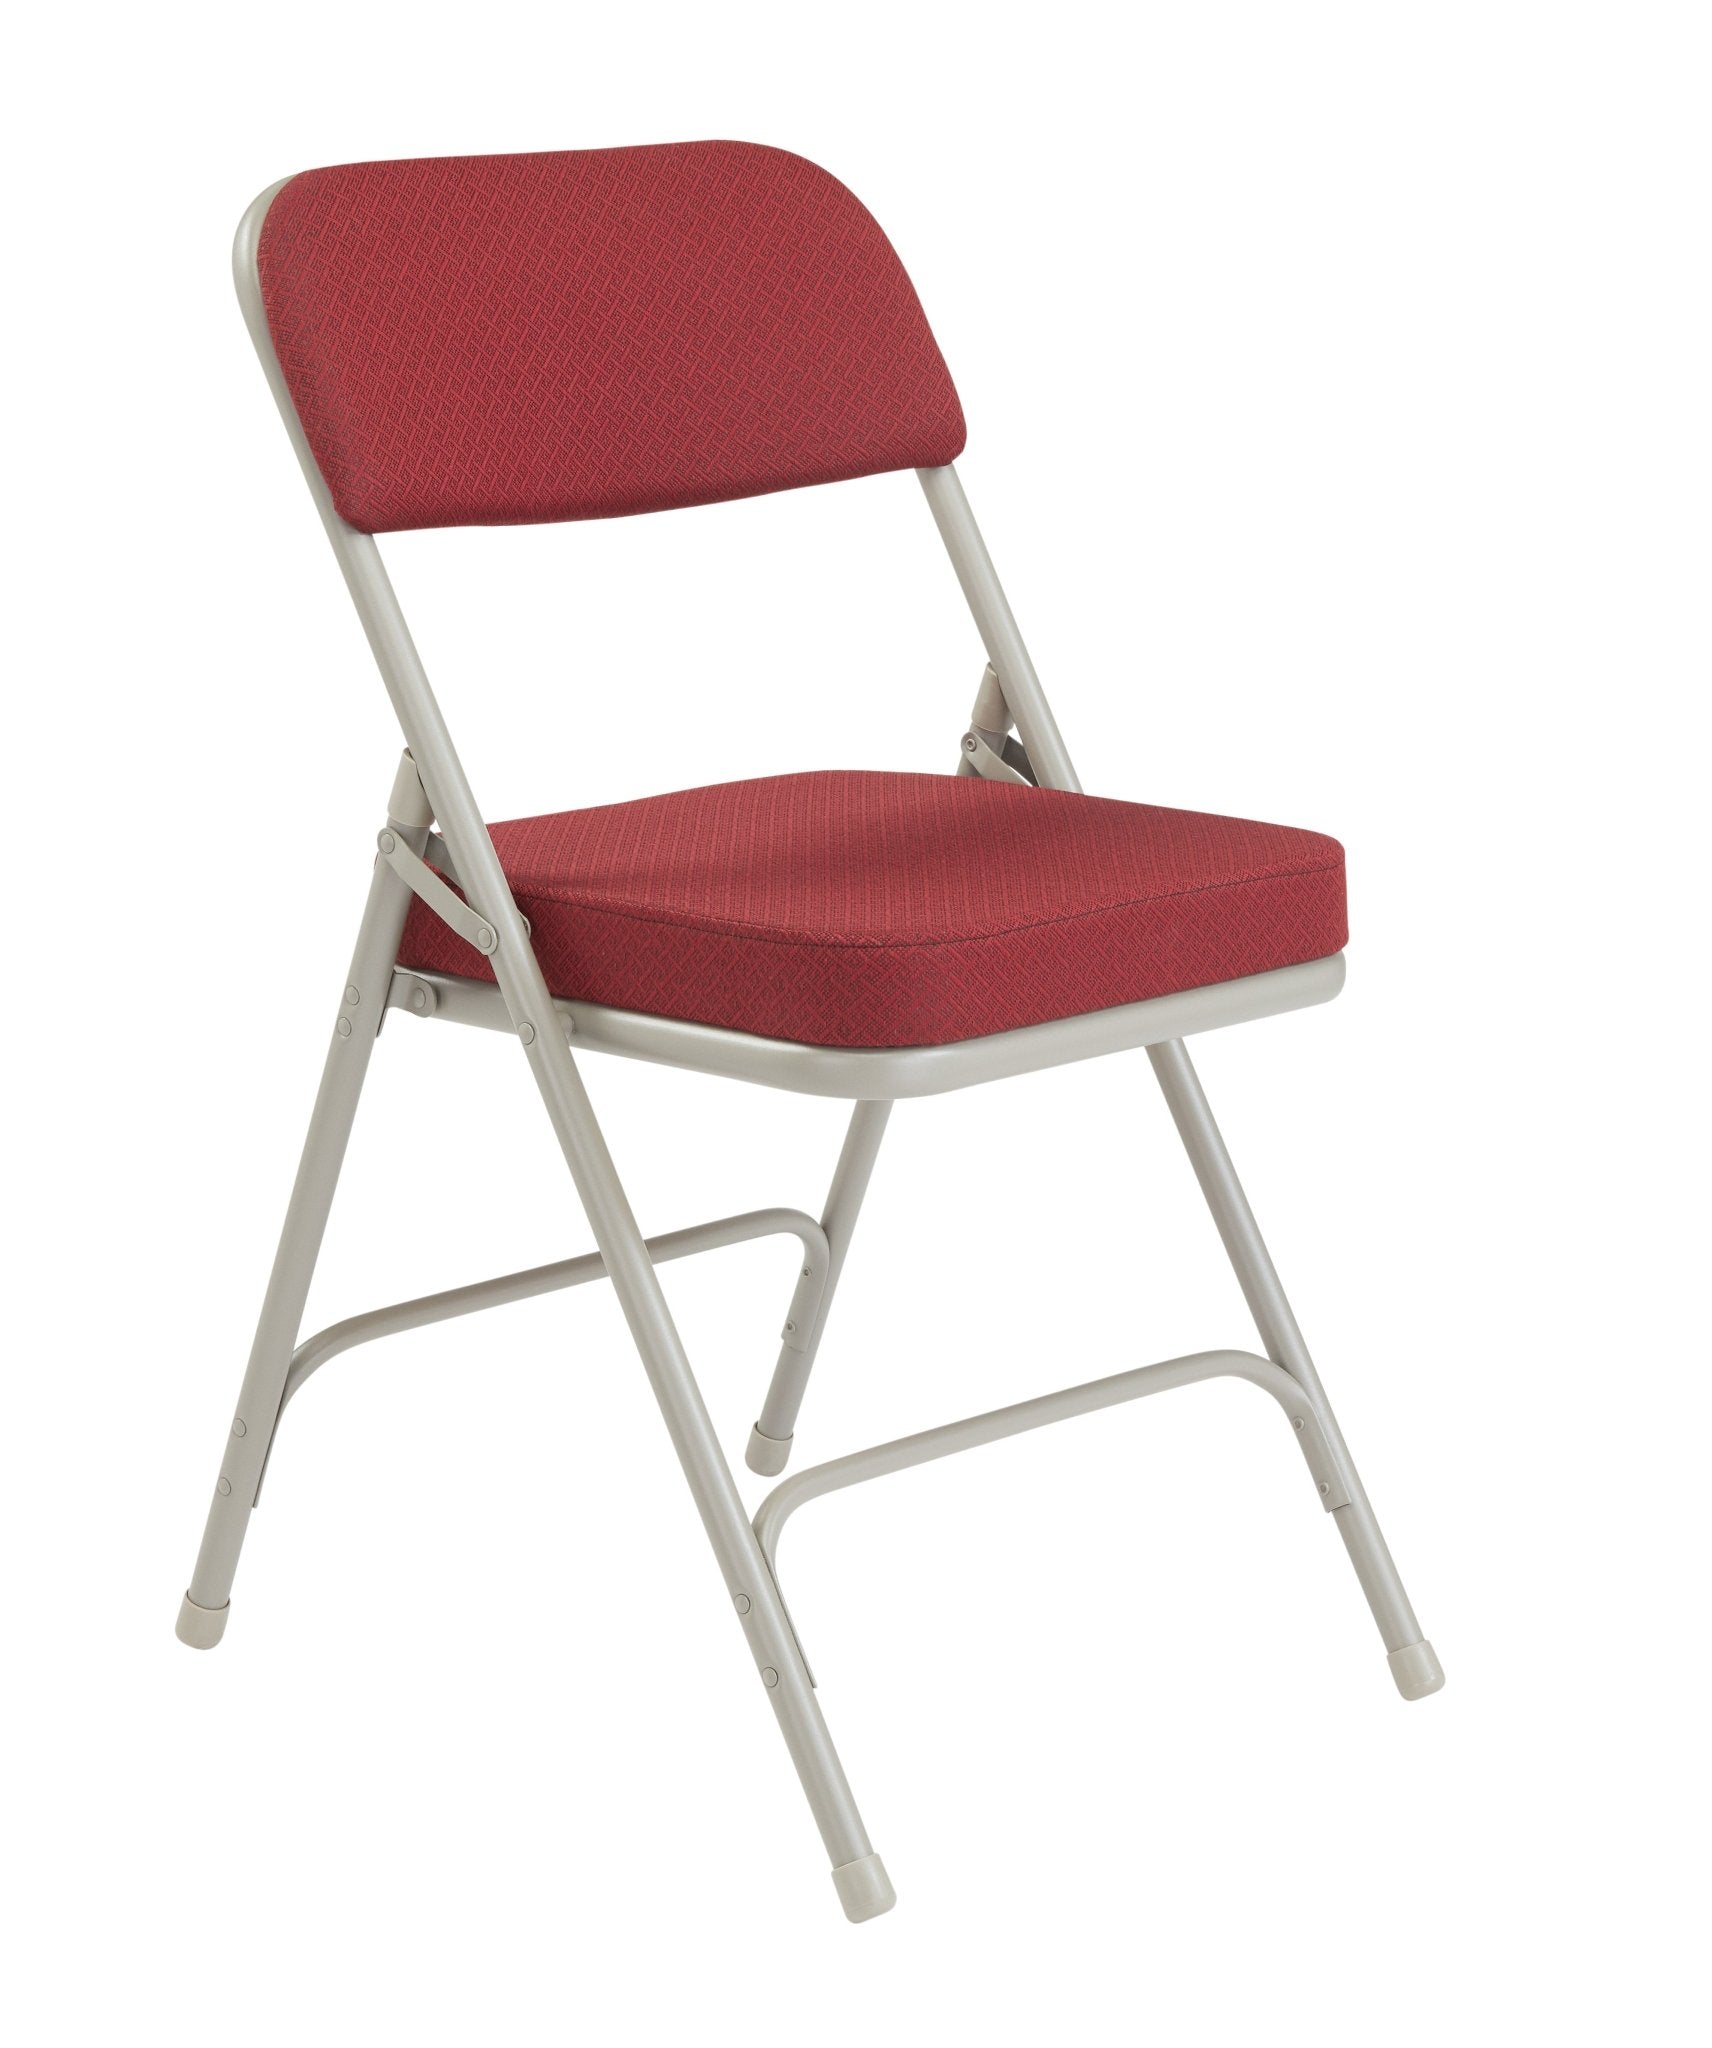 NPS 3200 Series Premium 2" Upholstered Seat Double Hinge Folding Chair (National Public Seating NPS-3200) - SchoolOutlet